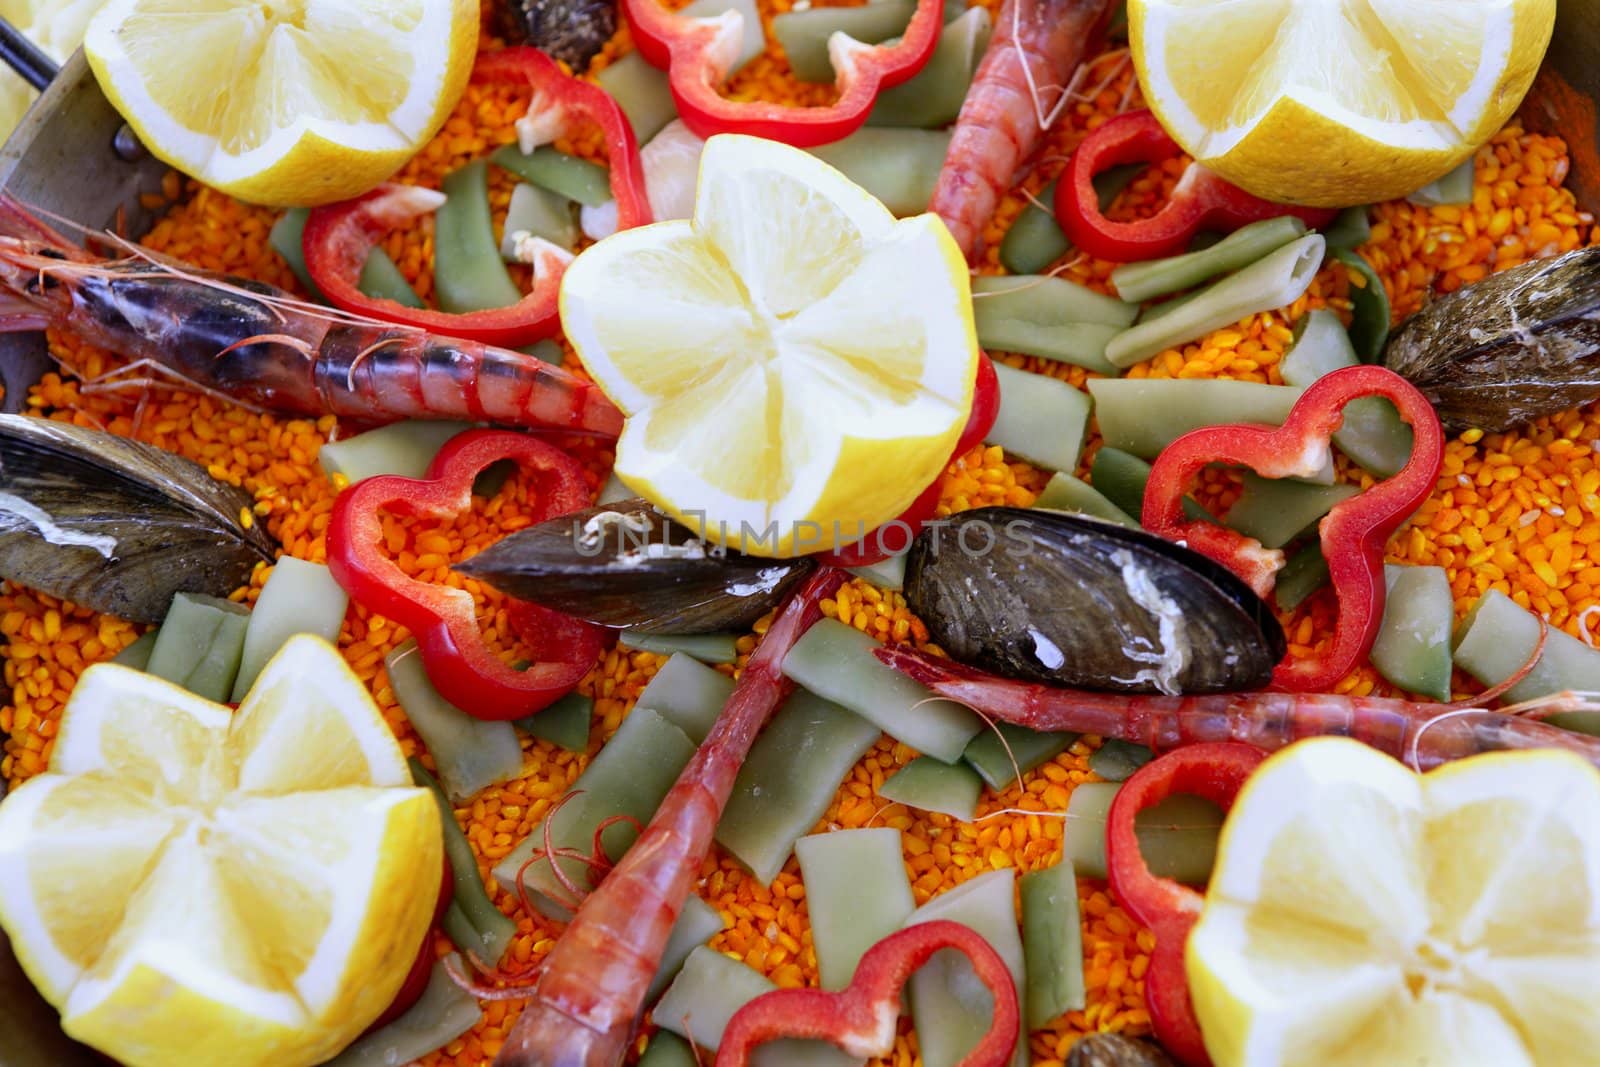 Mediterranean delicious paella seafood rice recipe from Spain